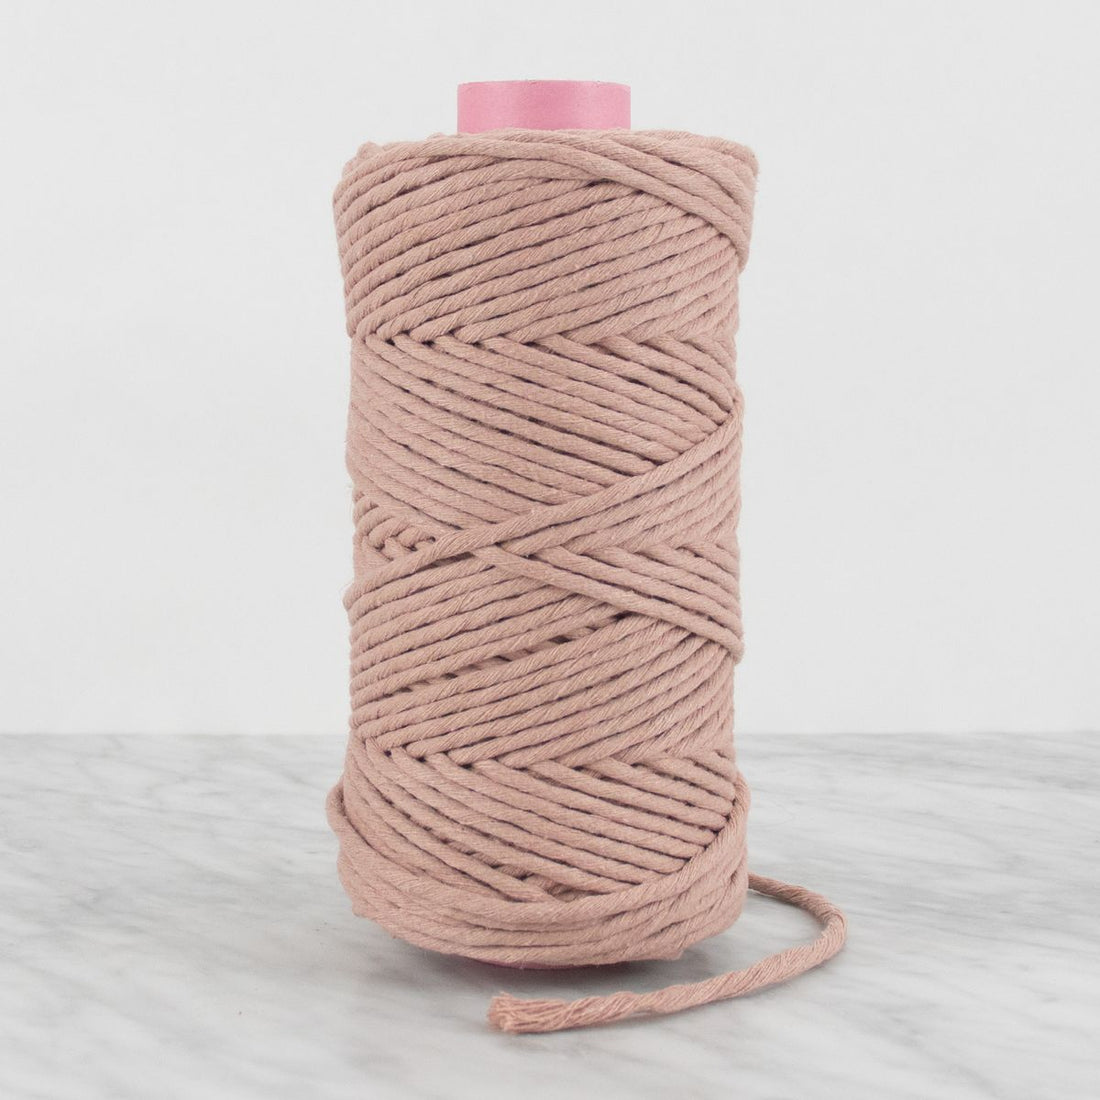 5mm Recycled Cotton String 0.5 kg - Antique Peach